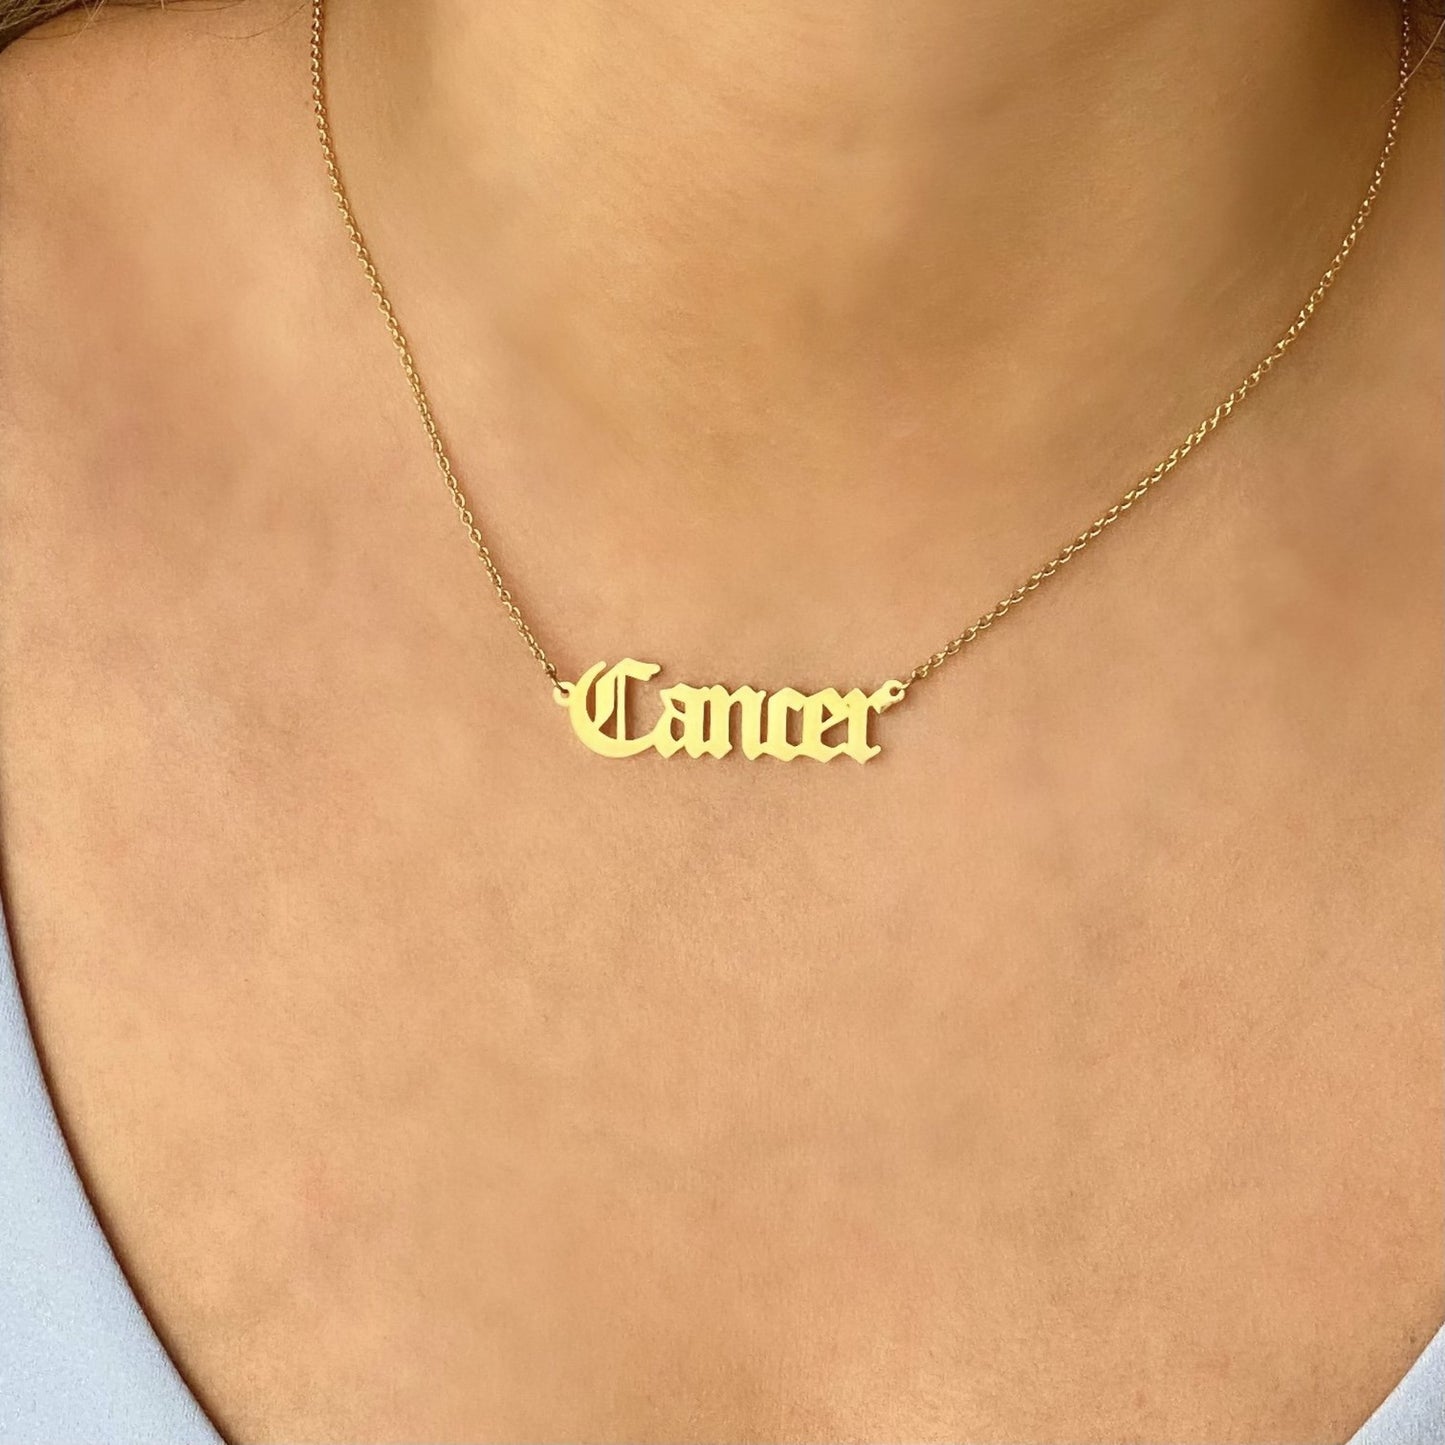 Old English Cancer Necklace